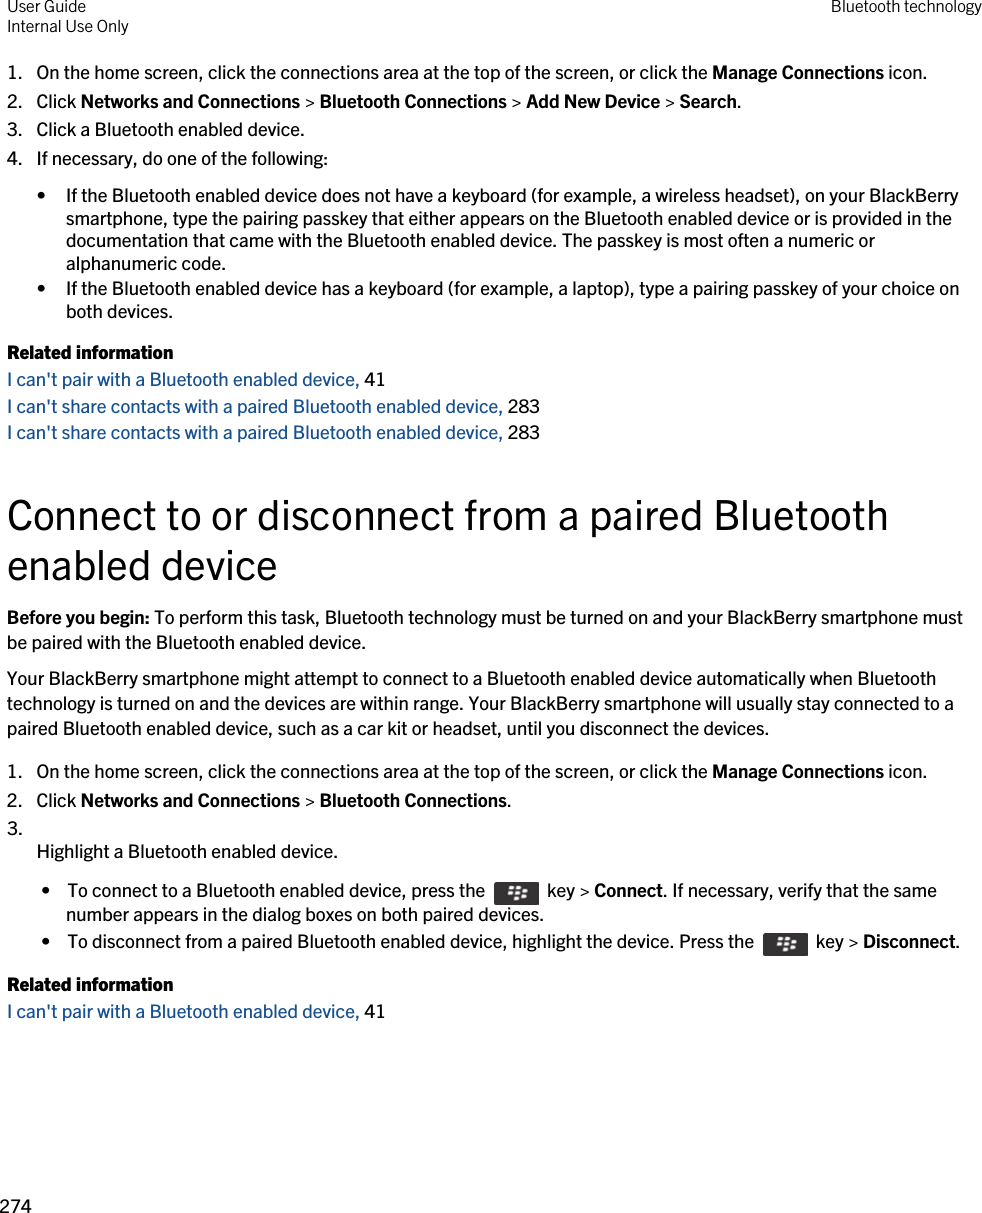 1. On the home screen, click the connections area at the top of the screen, or click the Manage Connections icon.2. Click Networks and Connections &gt; Bluetooth Connections &gt; Add New Device &gt; Search.3. Click a Bluetooth enabled device.4. If necessary, do one of the following:• If the Bluetooth enabled device does not have a keyboard (for example, a wireless headset), on your BlackBerry smartphone, type the pairing passkey that either appears on the Bluetooth enabled device or is provided in the documentation that came with the Bluetooth enabled device. The passkey is most often a numeric or alphanumeric code.• If the Bluetooth enabled device has a keyboard (for example, a laptop), type a pairing passkey of your choice on both devices.Related informationI can&apos;t pair with a Bluetooth enabled device, 41 I can&apos;t share contacts with a paired Bluetooth enabled device, 283I can&apos;t share contacts with a paired Bluetooth enabled device, 283Connect to or disconnect from a paired Bluetooth enabled deviceBefore you begin: To perform this task, Bluetooth technology must be turned on and your BlackBerry smartphone must be paired with the Bluetooth enabled device.Your BlackBerry smartphone might attempt to connect to a Bluetooth enabled device automatically when Bluetooth technology is turned on and the devices are within range. Your BlackBerry smartphone will usually stay connected to a paired Bluetooth enabled device, such as a car kit or headset, until you disconnect the devices.1. On the home screen, click the connections area at the top of the screen, or click the Manage Connections icon.2. Click Networks and Connections &gt; Bluetooth Connections.3.  Highlight a Bluetooth enabled device. •  To connect to a Bluetooth enabled device, press the    key &gt; Connect. If necessary, verify that the same number appears in the dialog boxes on both paired devices. •  To disconnect from a paired Bluetooth enabled device, highlight the device. Press the    key &gt; Disconnect.Related informationI can&apos;t pair with a Bluetooth enabled device, 41 User GuideInternal Use Only Bluetooth technology274 